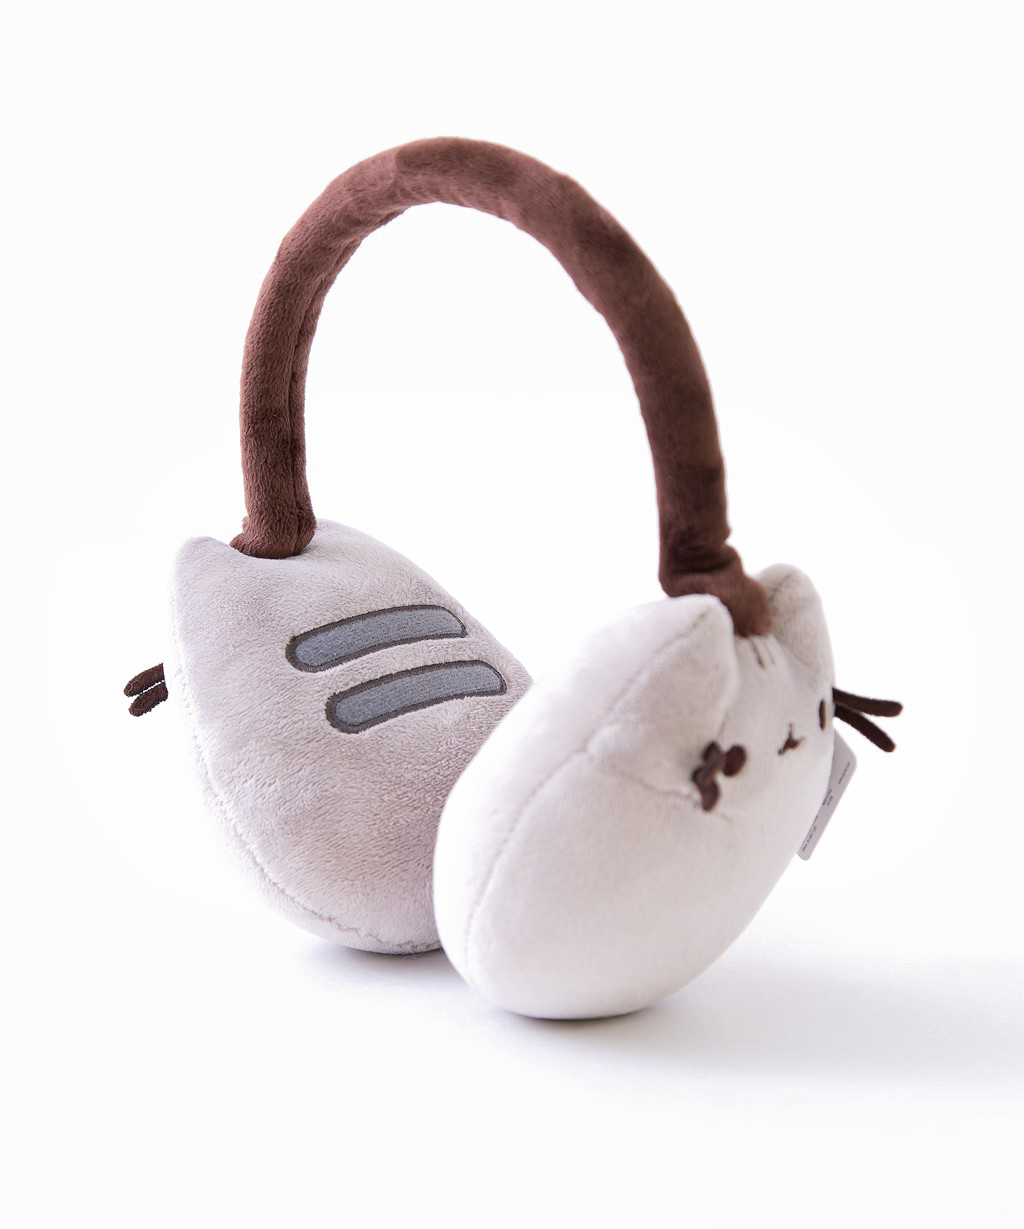 Earmuffs Picture Free HQ Image PNG Image